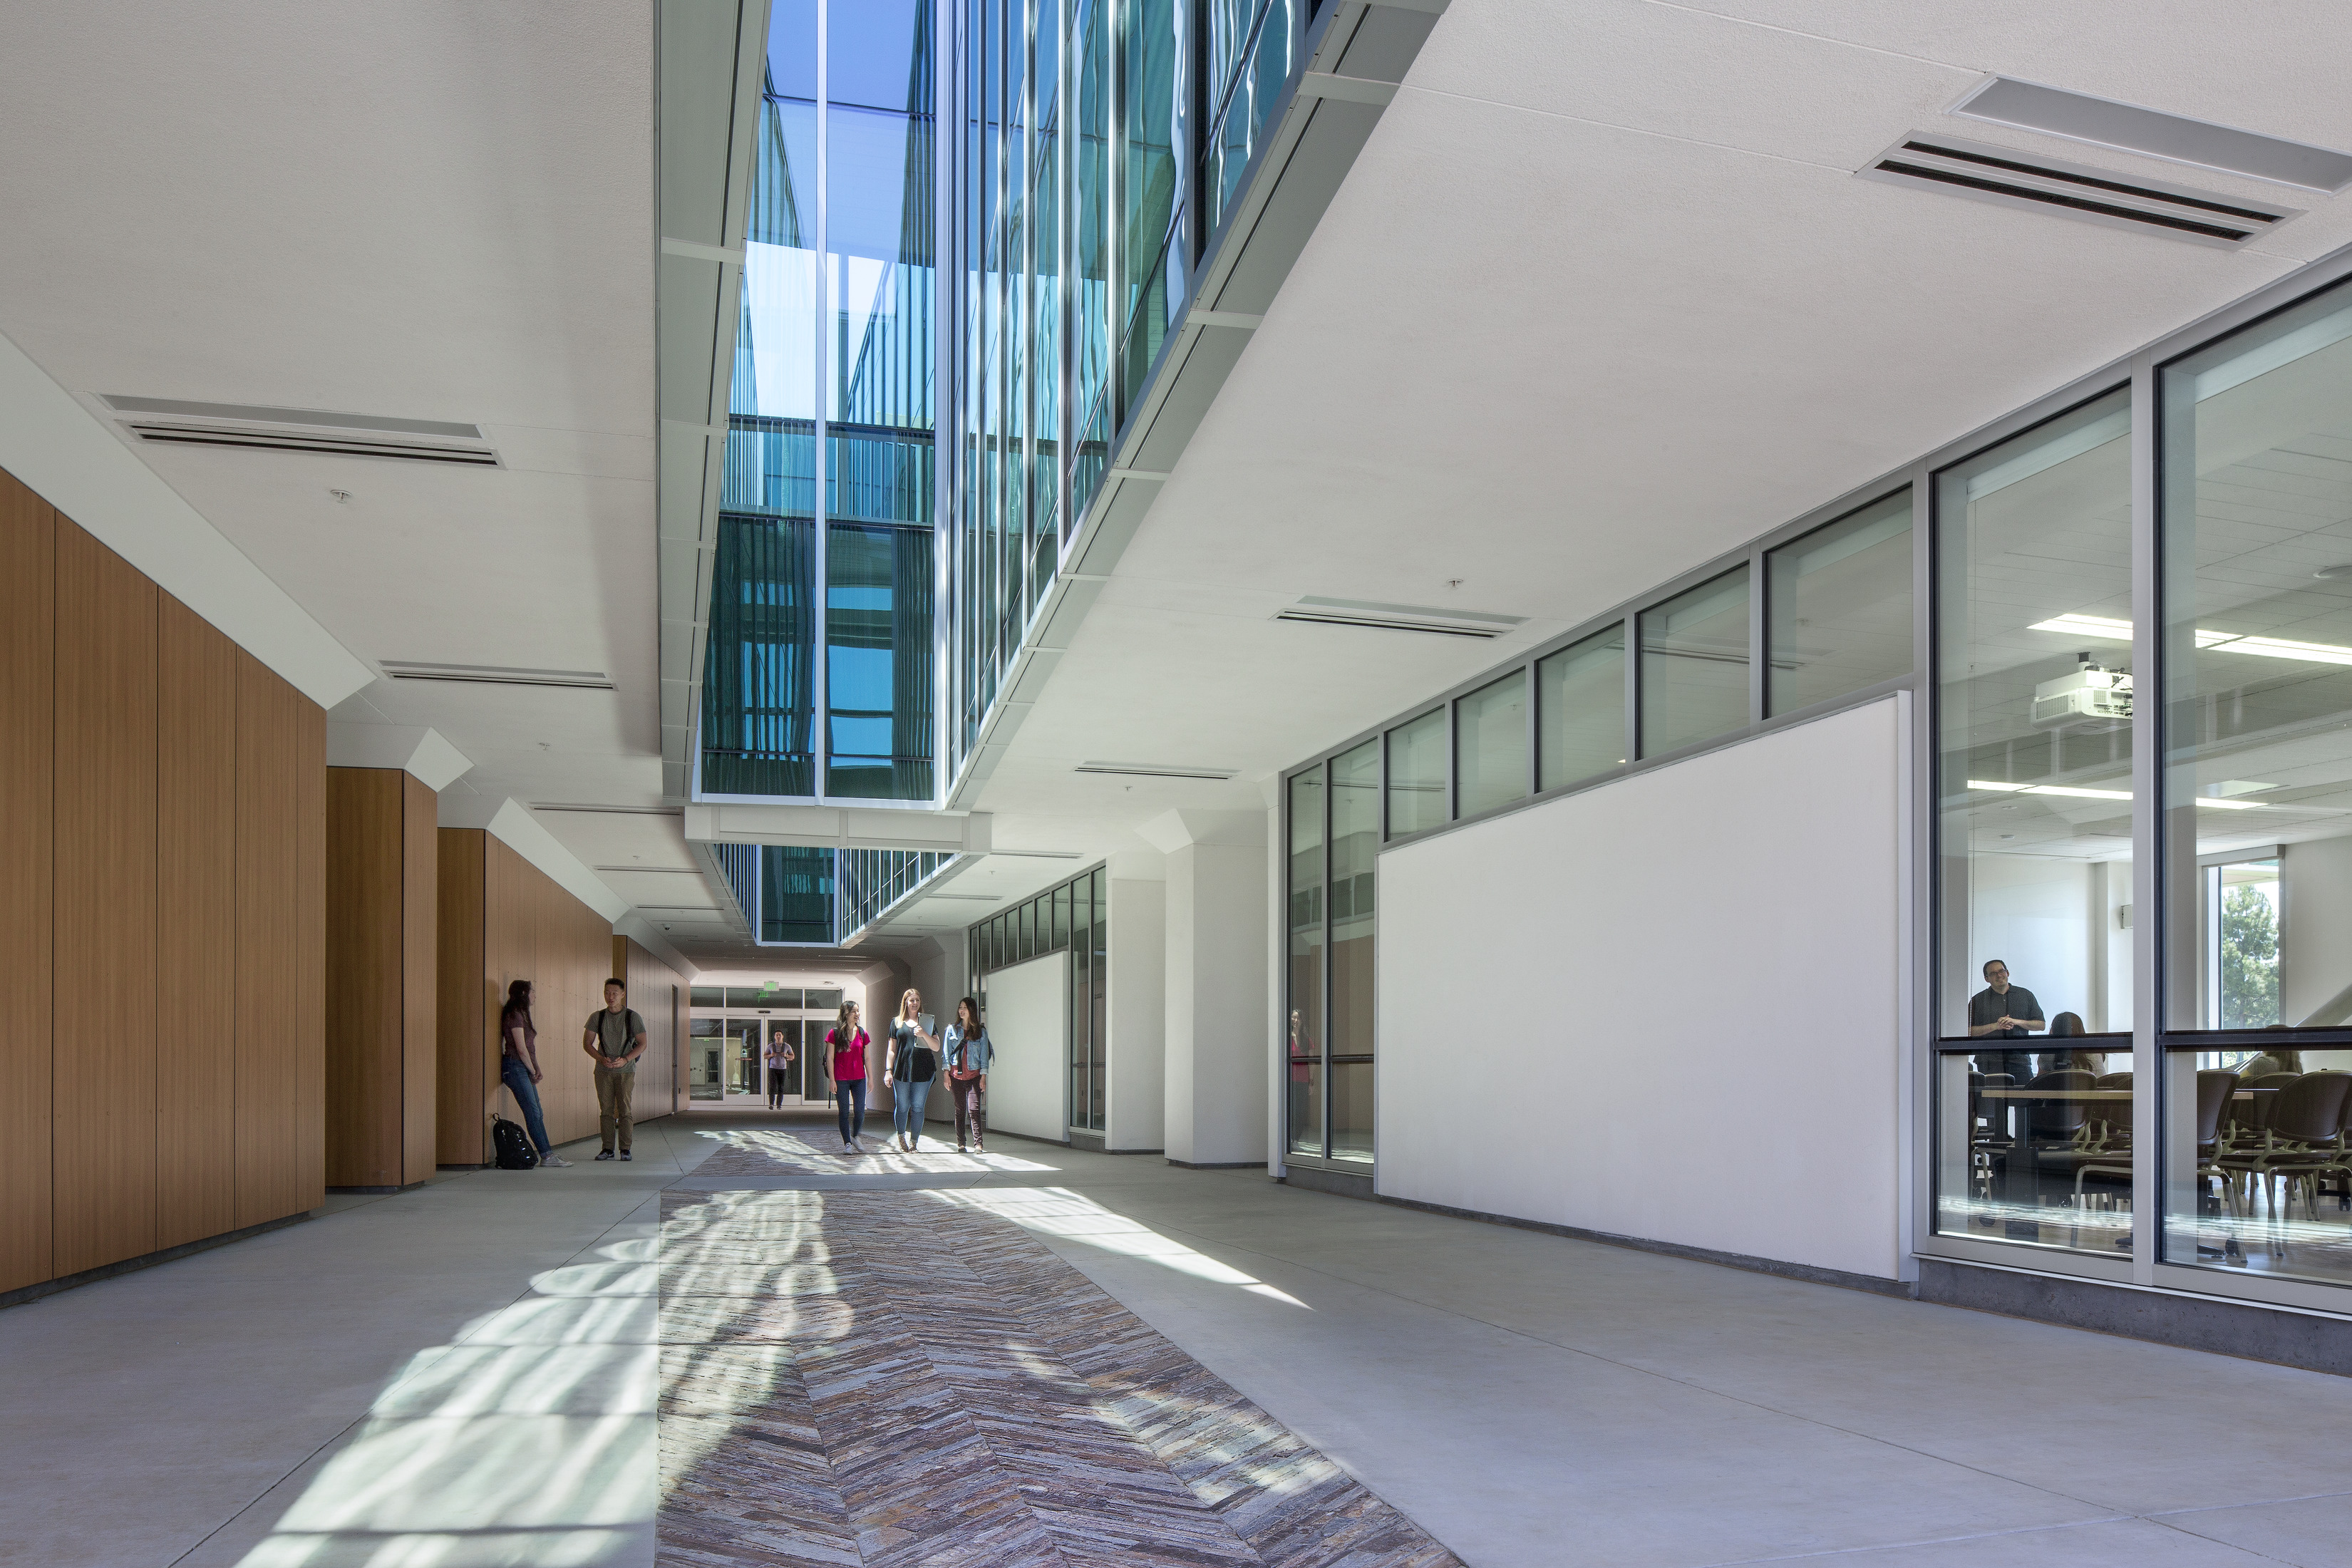 Energy-efficient building design used in the Evergreen Valley College Math, Science, and Social Science Building.